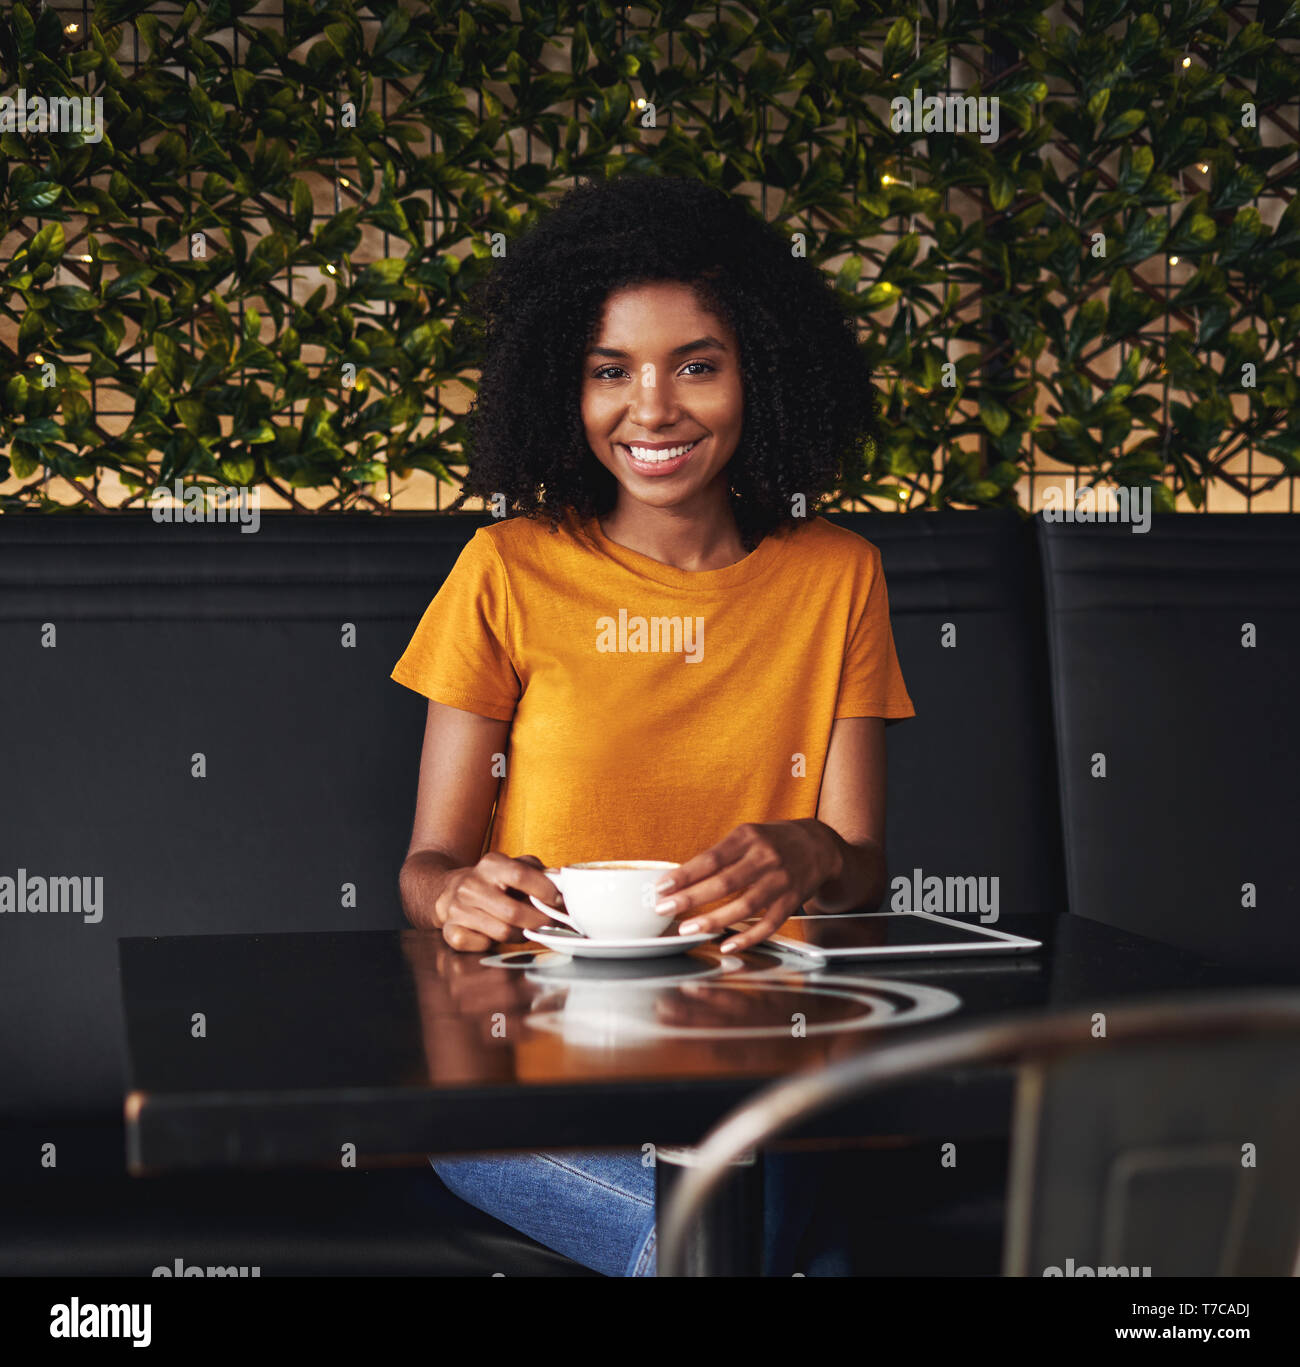 Portrait of a smiling young woman sitting in cafe Banque D'Images